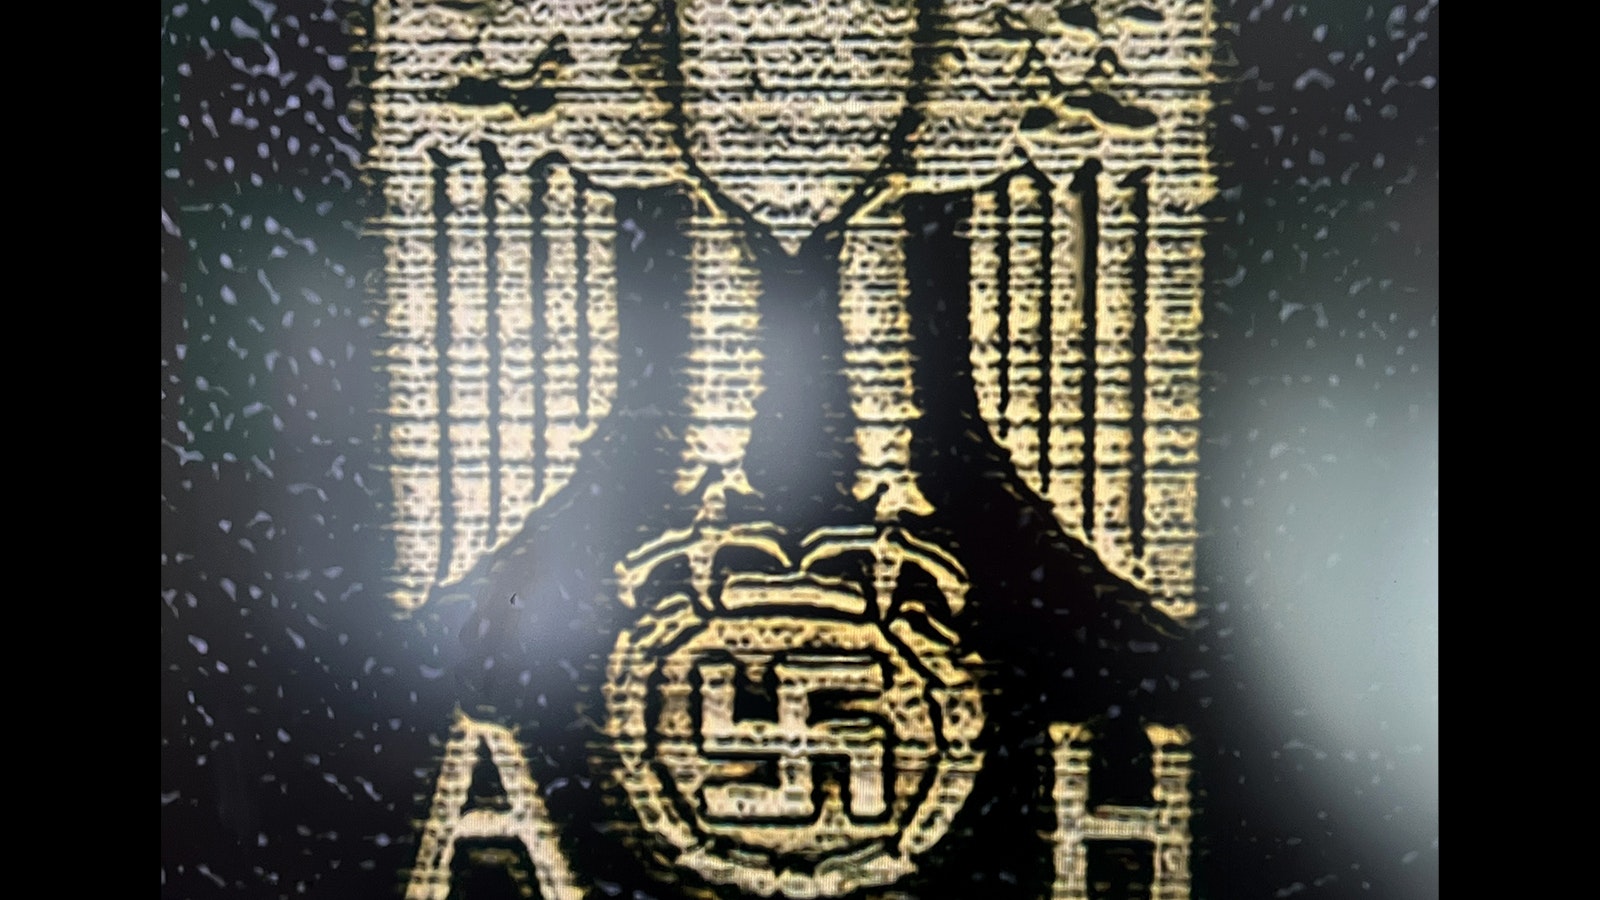 The photo albums Pvt. Alton More took from Hitler's Eagle's Next had a swastika and the initials "AH" on them, perhaps similar to this, as depicted on "Brad Meltzer's Lost History" on the History Channel.